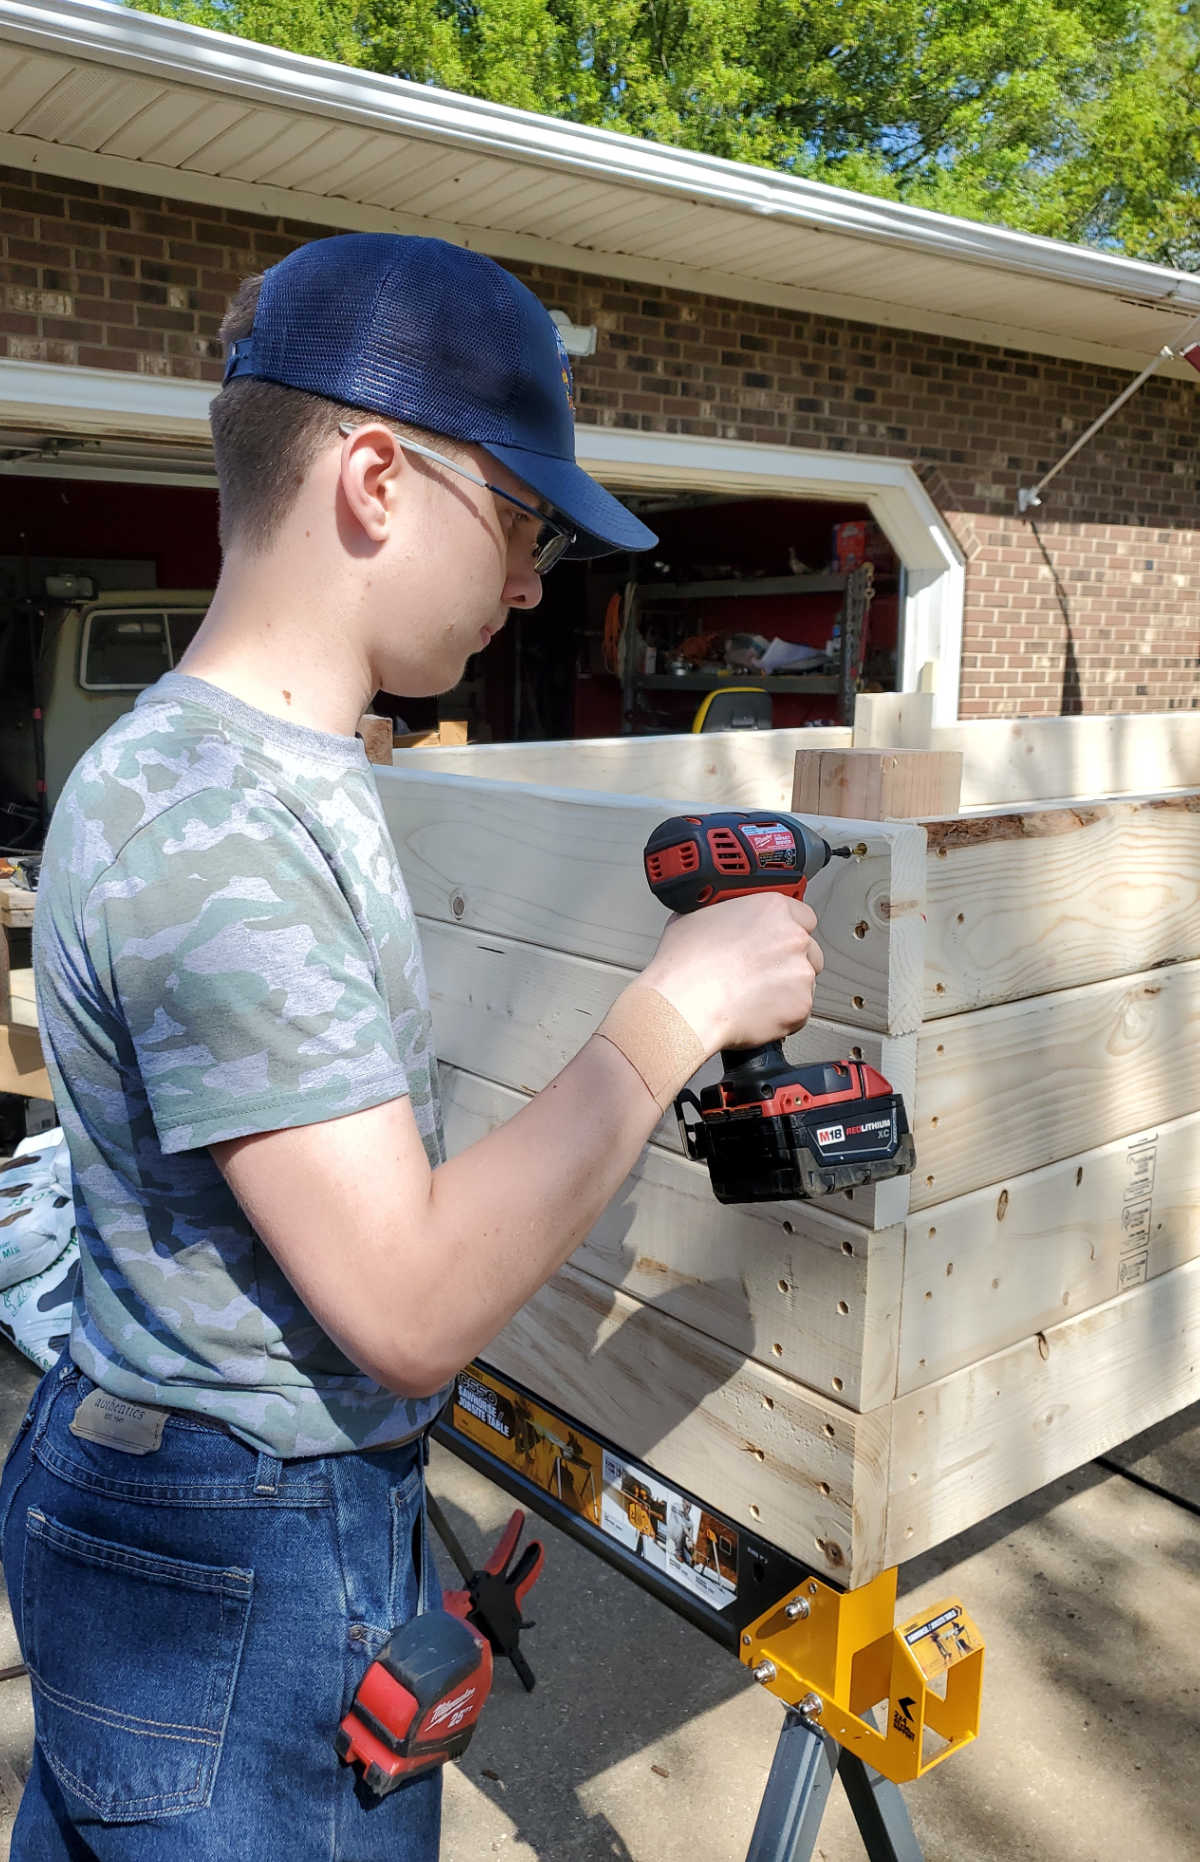 Young boy with jeans and blue baseball cap using drill to put screws into wood on DIY raised bed.